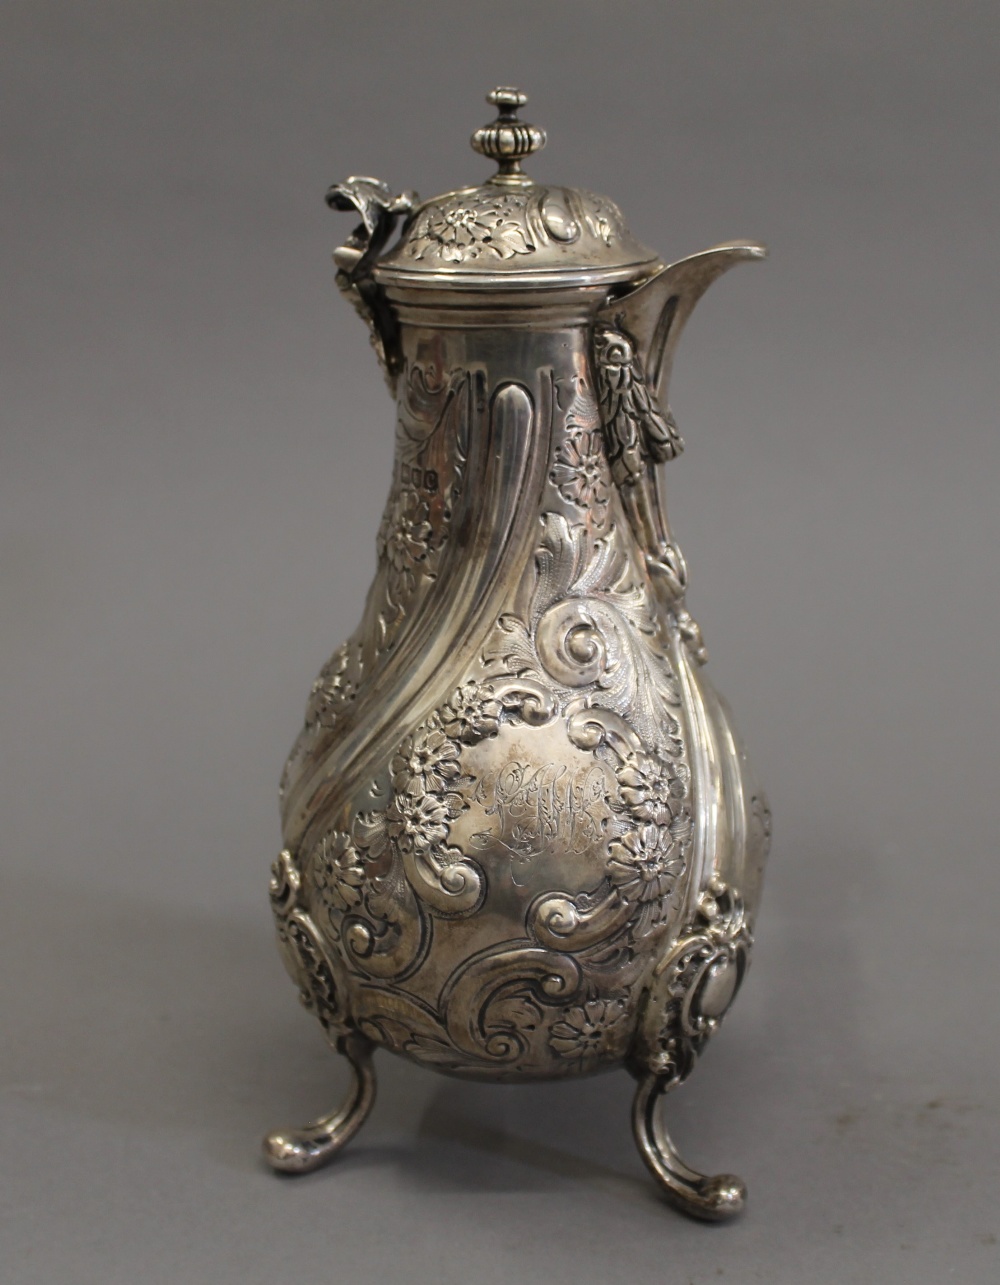 A silver embossed chocolate pot. 21 cm high. 19.6 troy ounces total weight. - Image 3 of 8